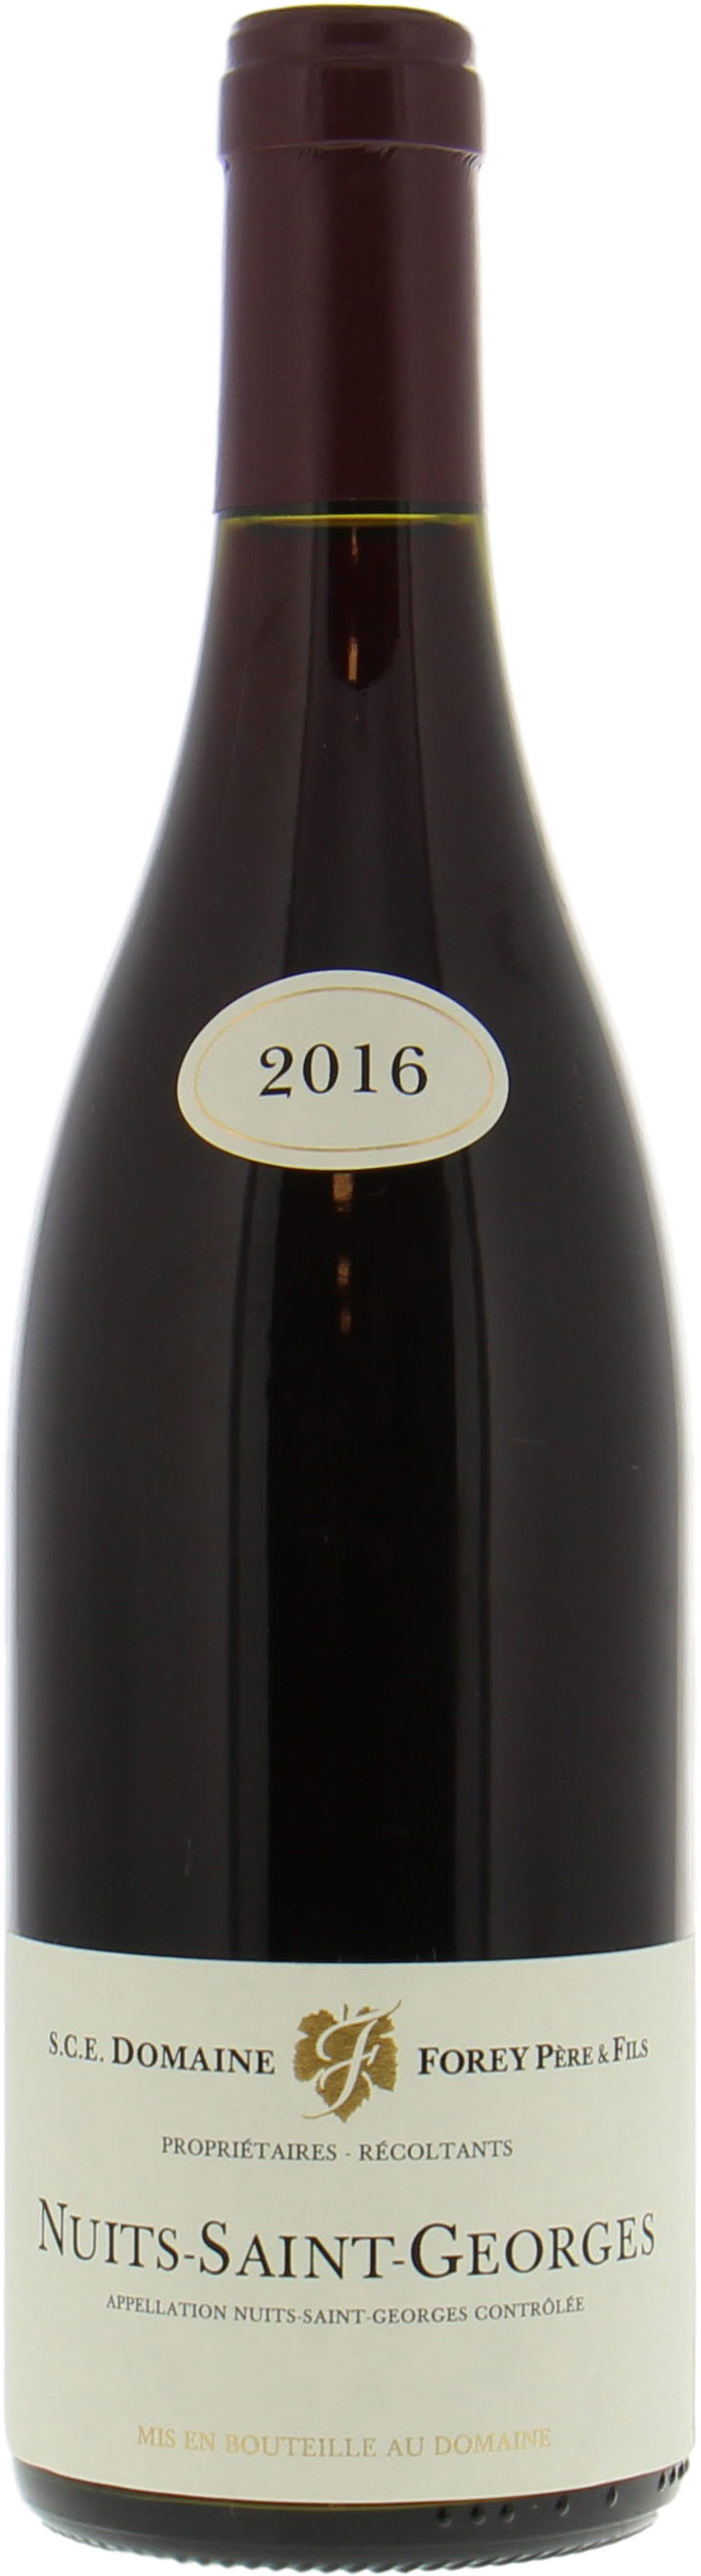 Domaine Forey Pere & Fils - Nuits St. Georges 2016 Perfect